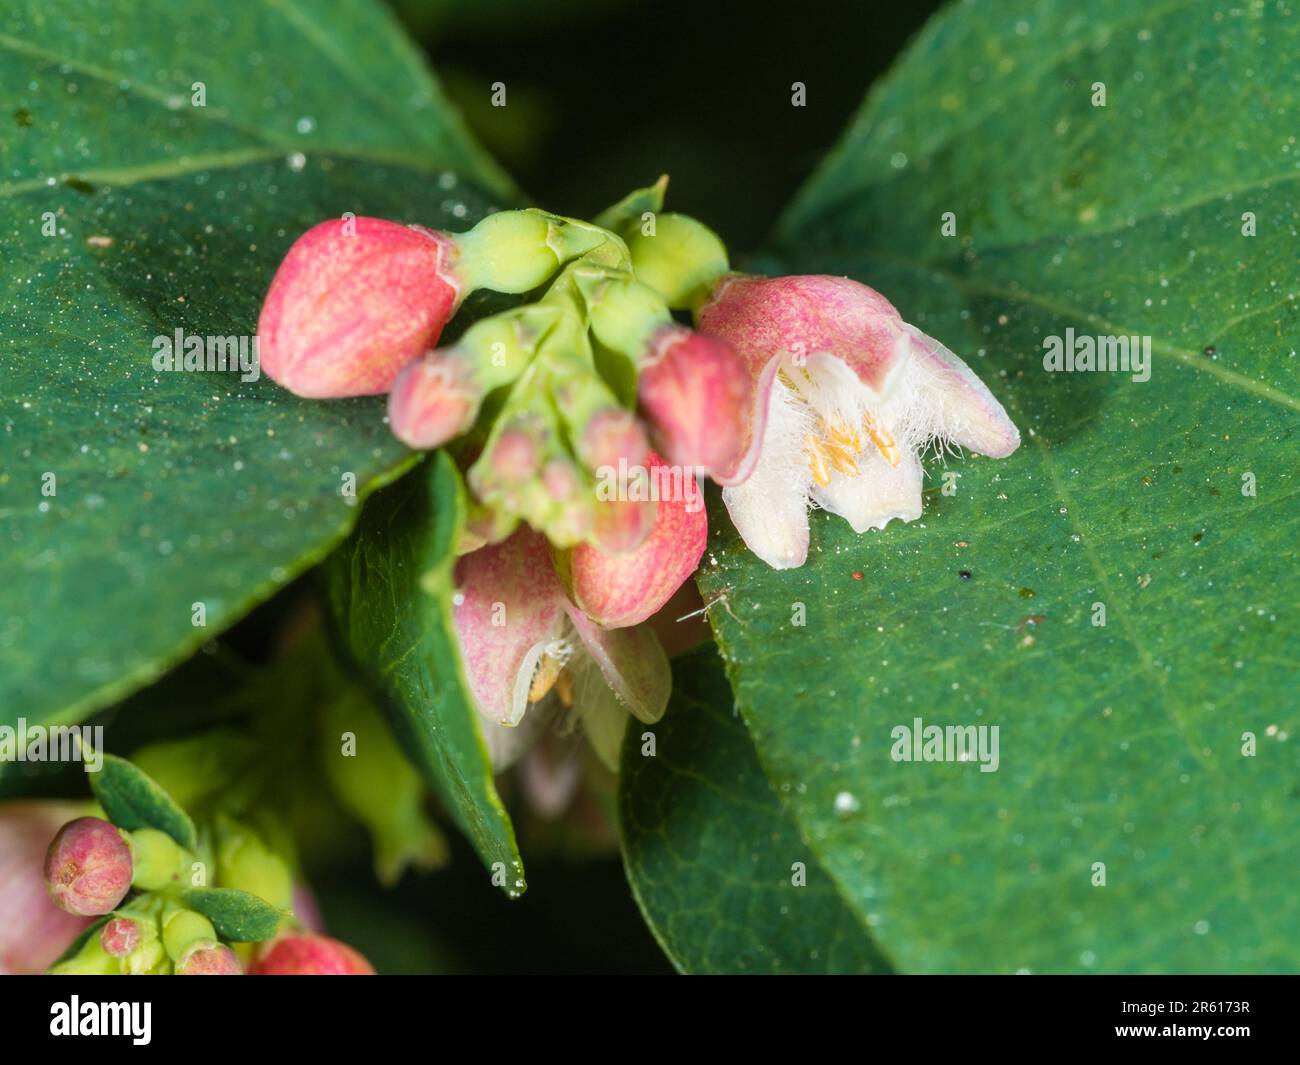 Early summer pink and white flowers of the deciduous snowberry shrub, Symphoricarpos albus Stock Photo